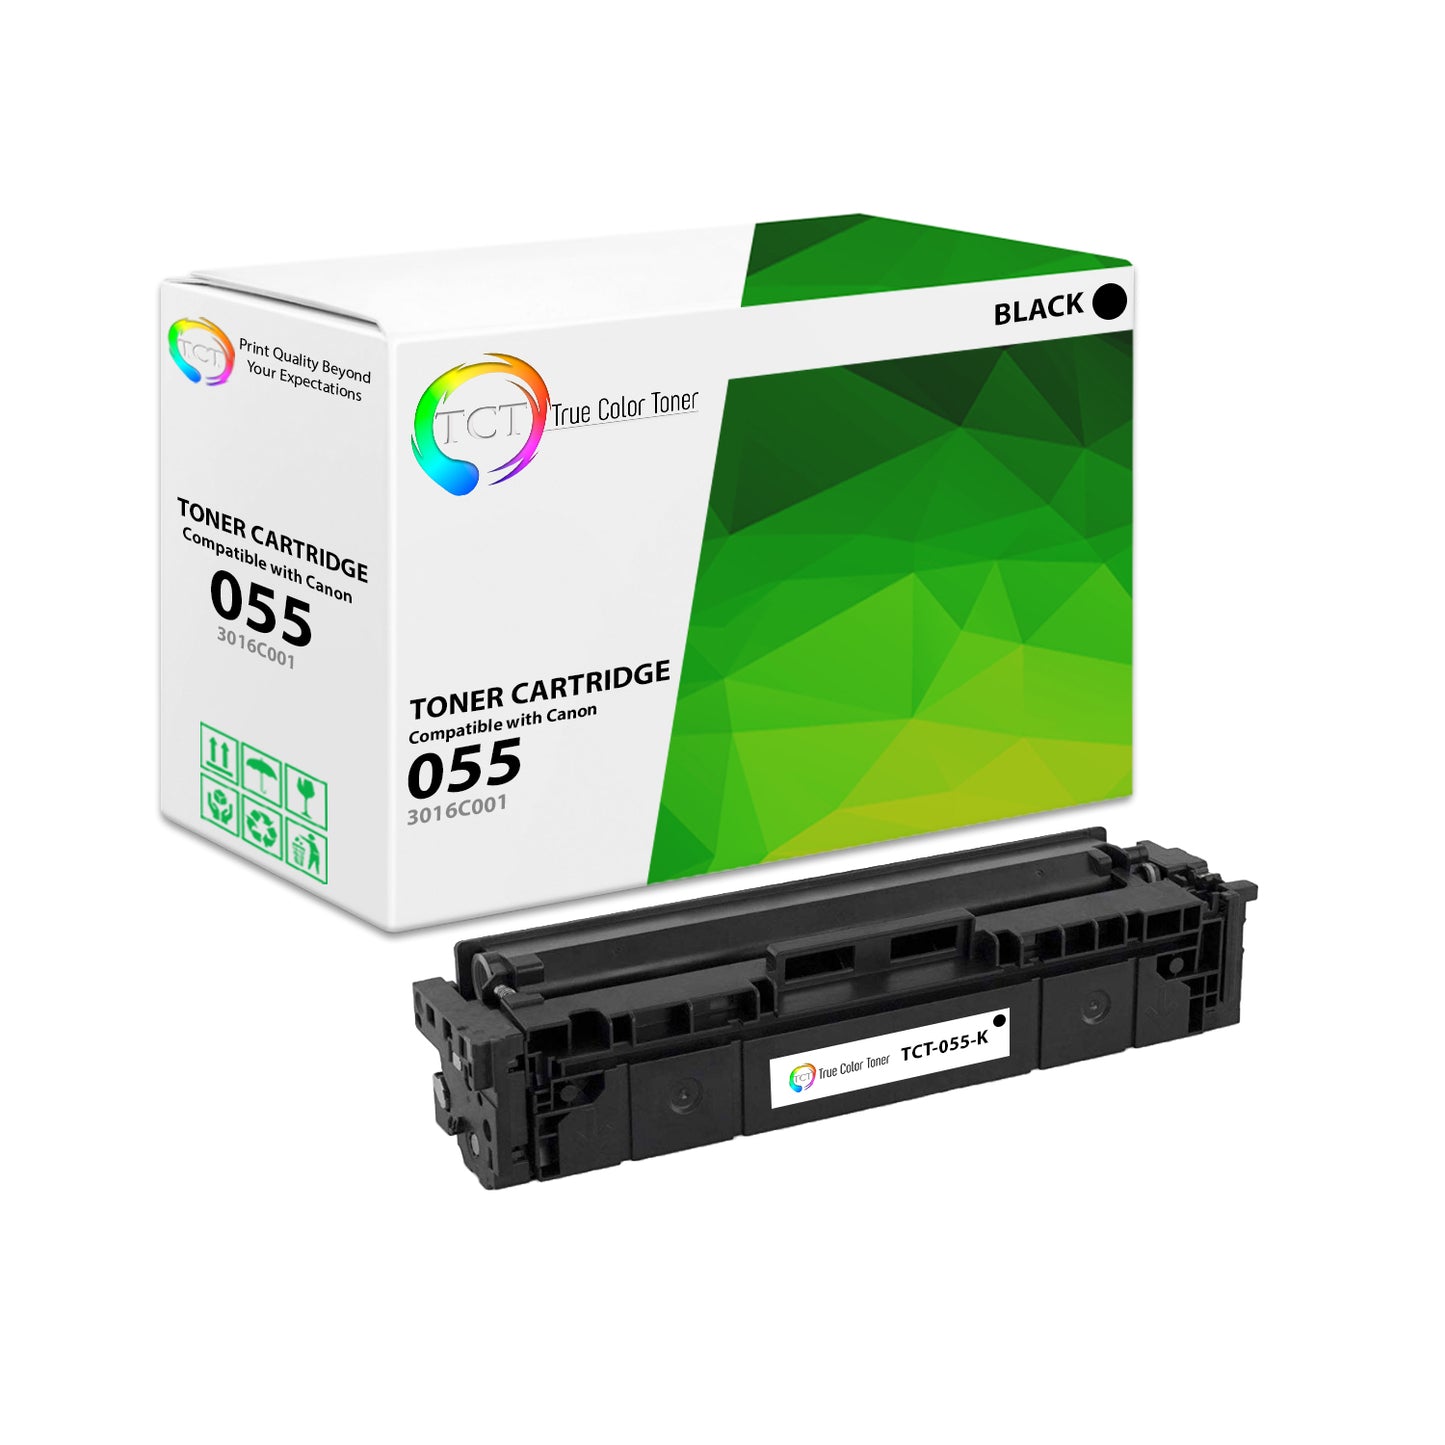 TCT Compatible Toner Cartridge Replacement for the Canon 055 Series - 1 Pack Black